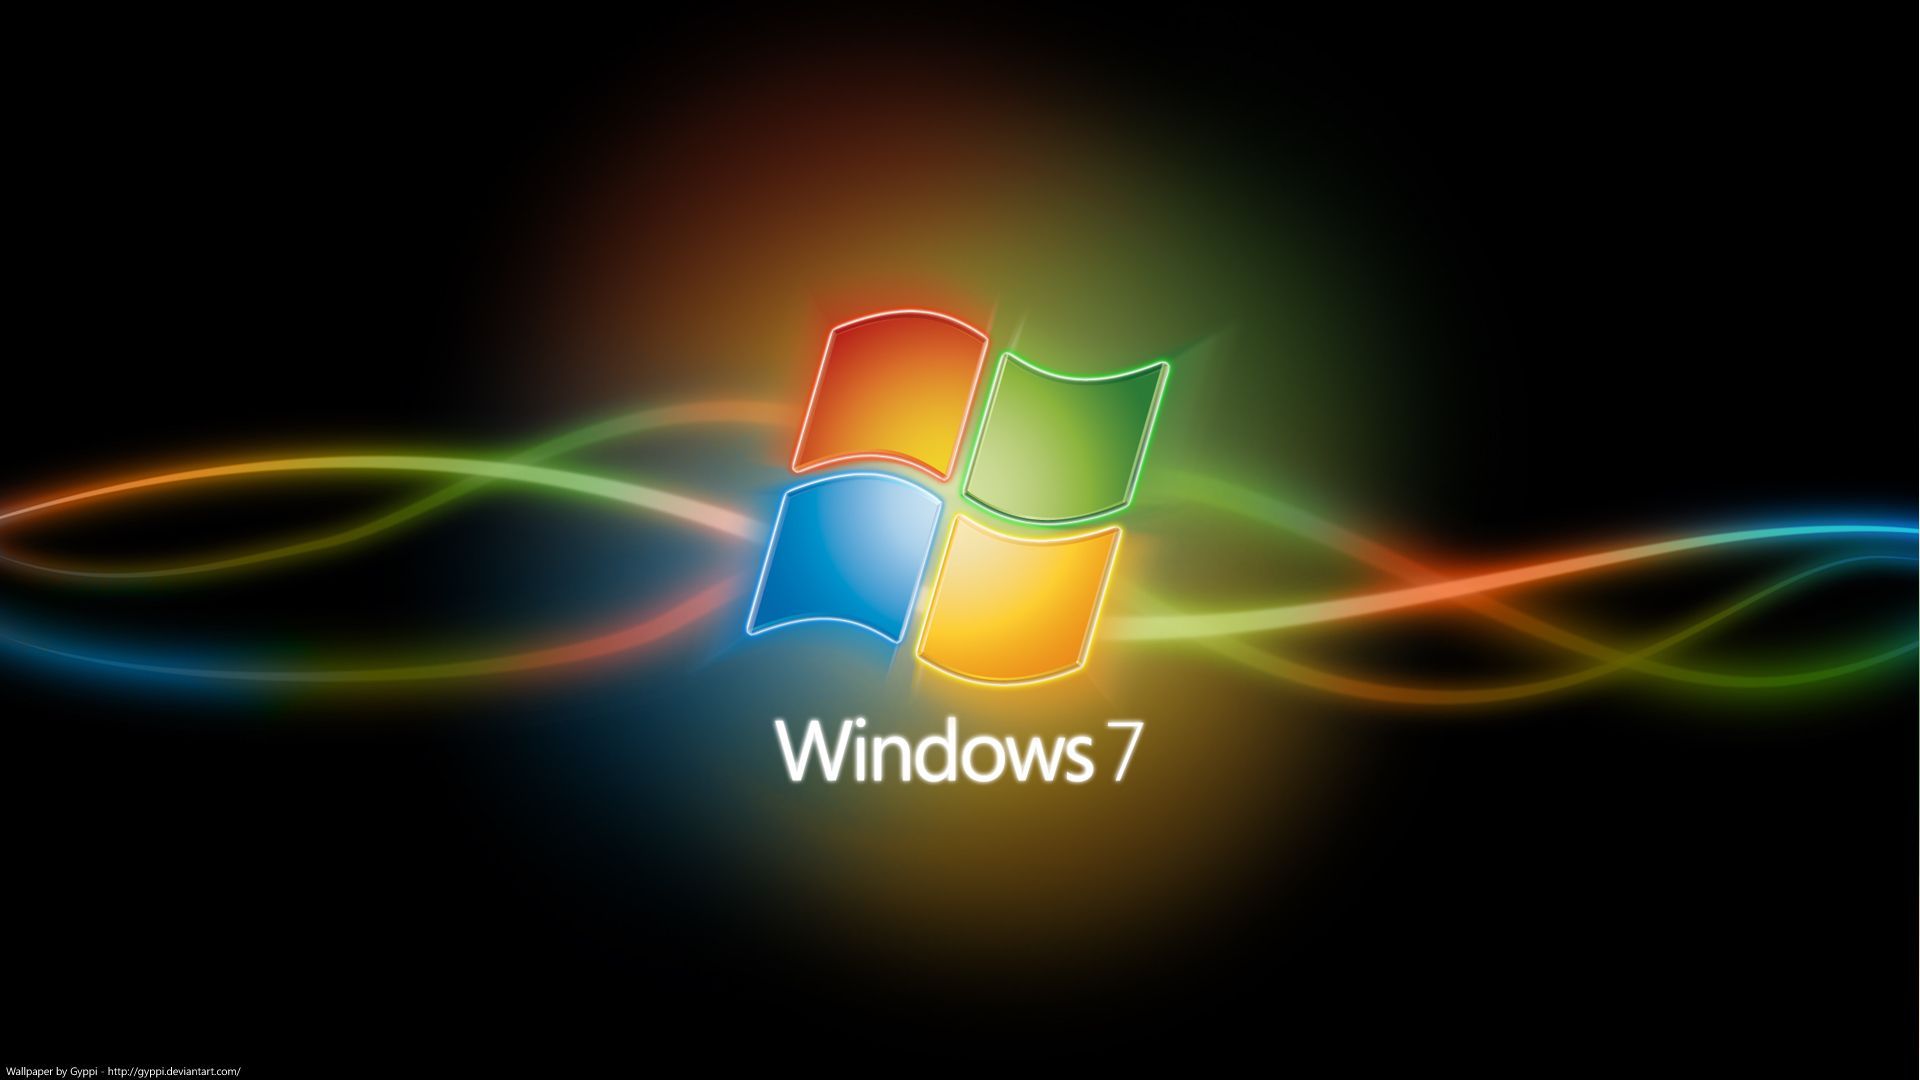 Windows Backgrounds Pictures - Wallpaper Cave